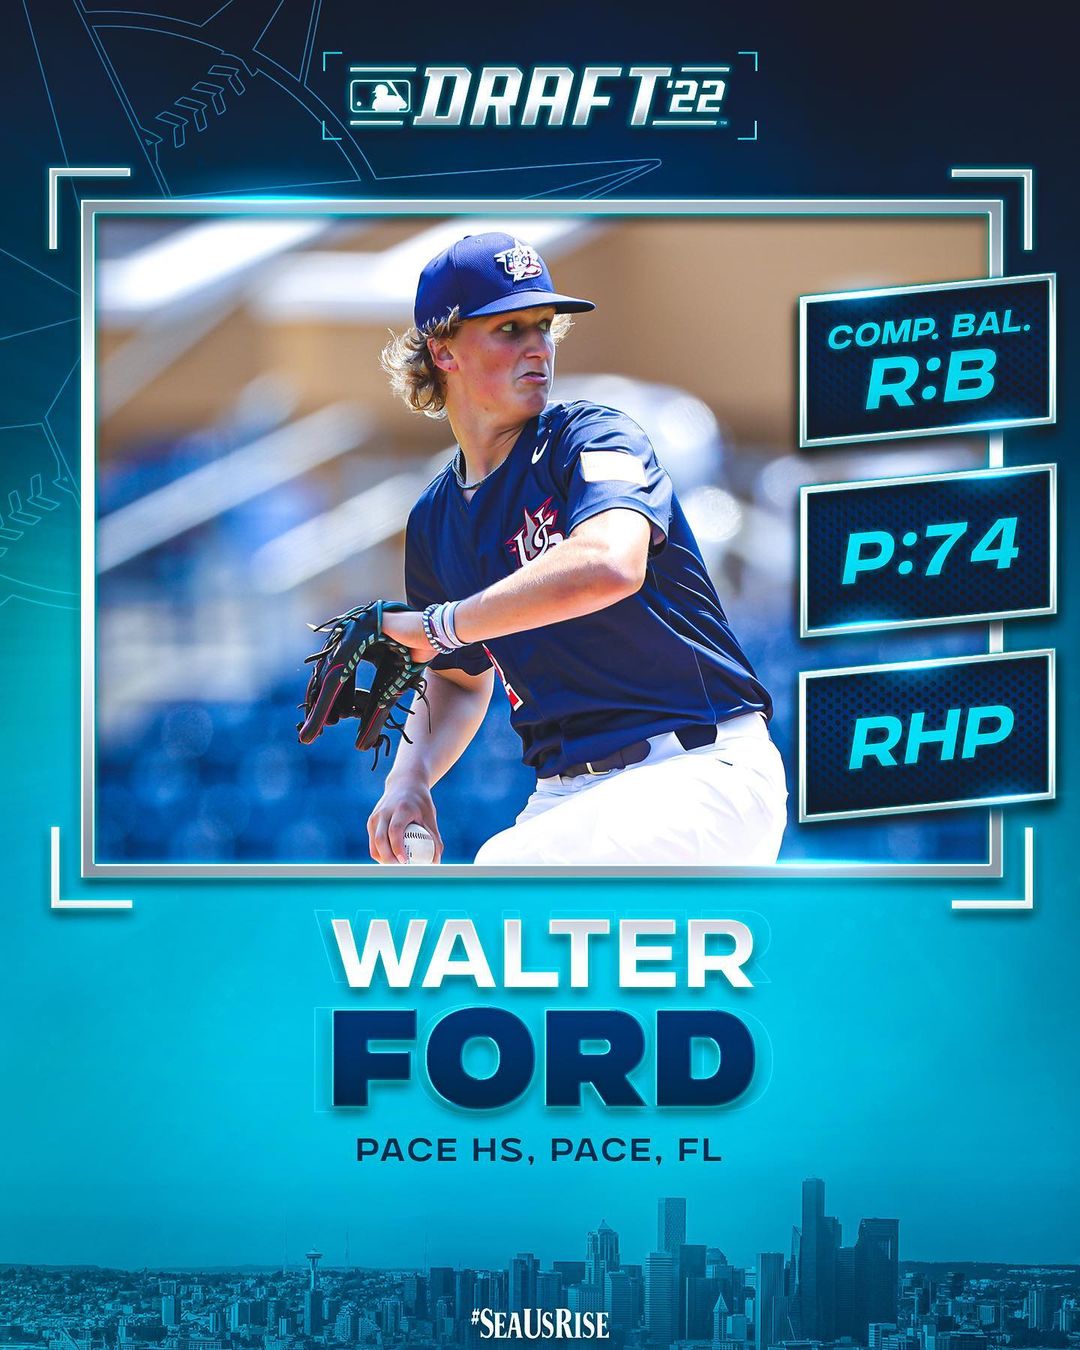 Drum roll please…  With the 74th pick in the 2022 #MLBDraft, we have selected ...